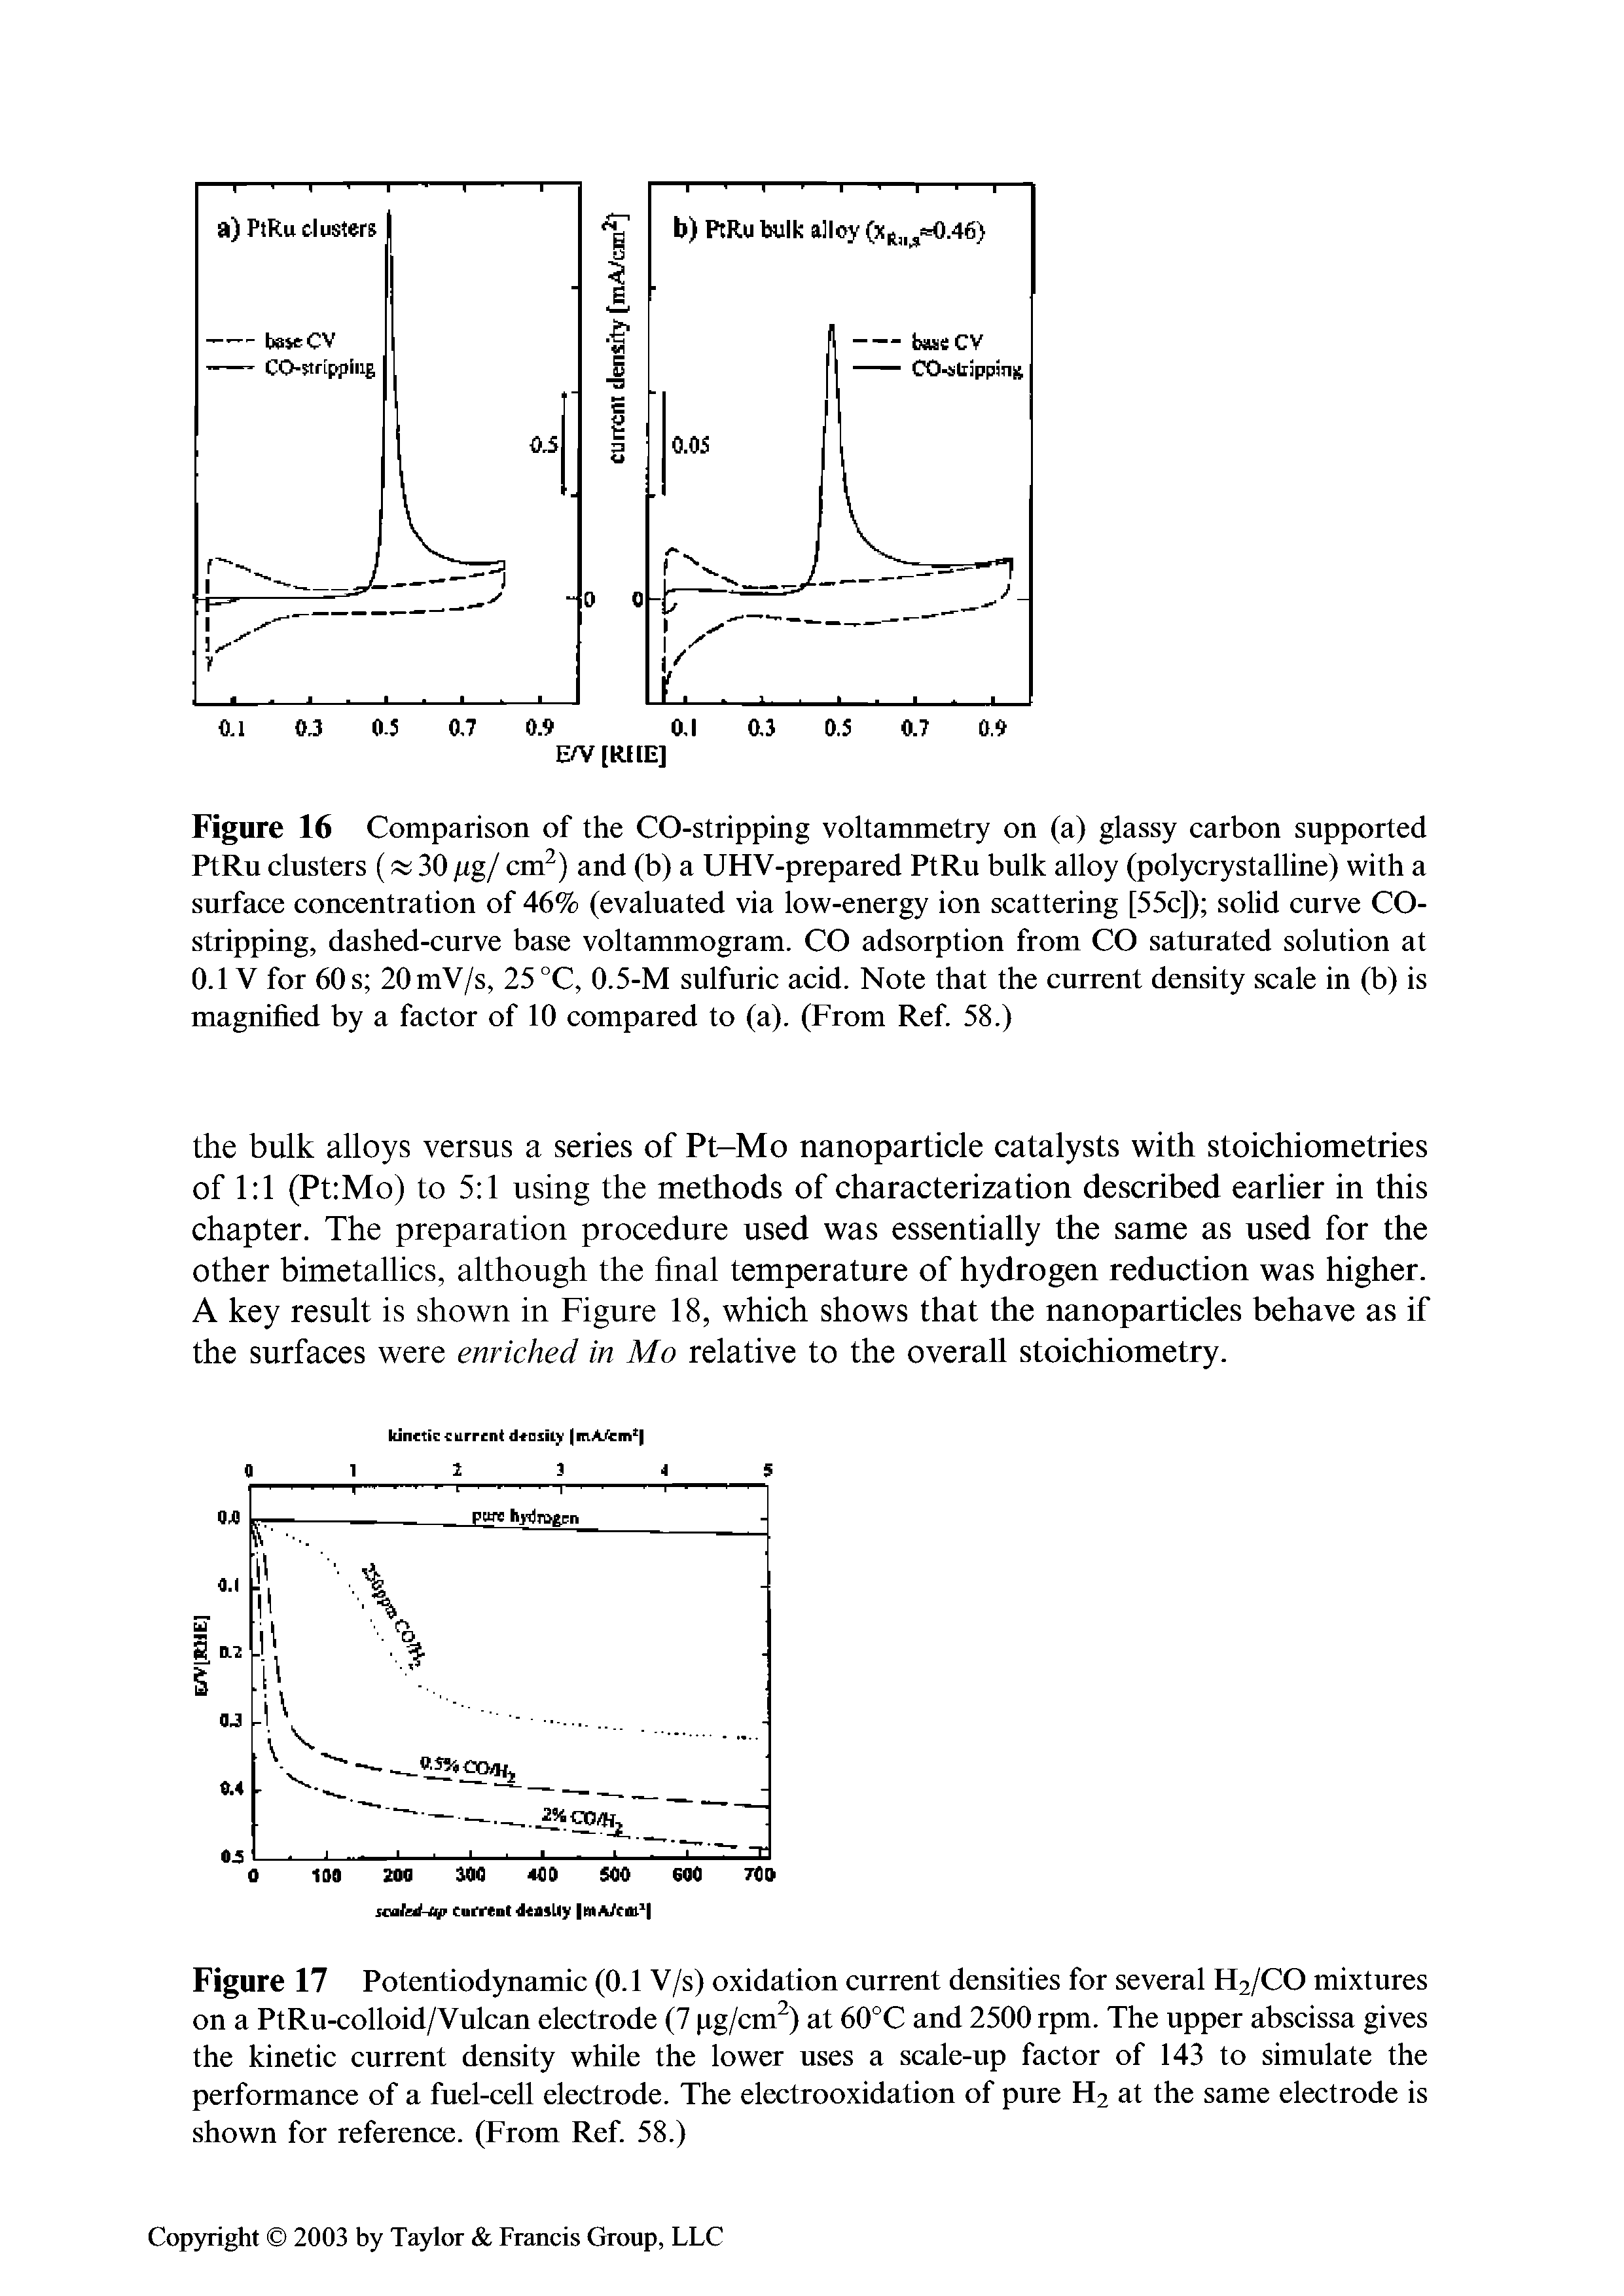 Figure 17 Potentiodynamic (0.1 V/s) oxidation current densities for several H2/CO mixtures on a PtRu-colloid/Vulcan electrode (7 pg/cm ) at 60°C and 2500 rpm. The upper abscissa gives the kinetic current density while the lower uses a scale-up factor of 143 to simulate the performance of a fuel-cell electrode. The electrooxidation of pure H2 at the same electrode is shown for reference. (From Ref. 58.)...